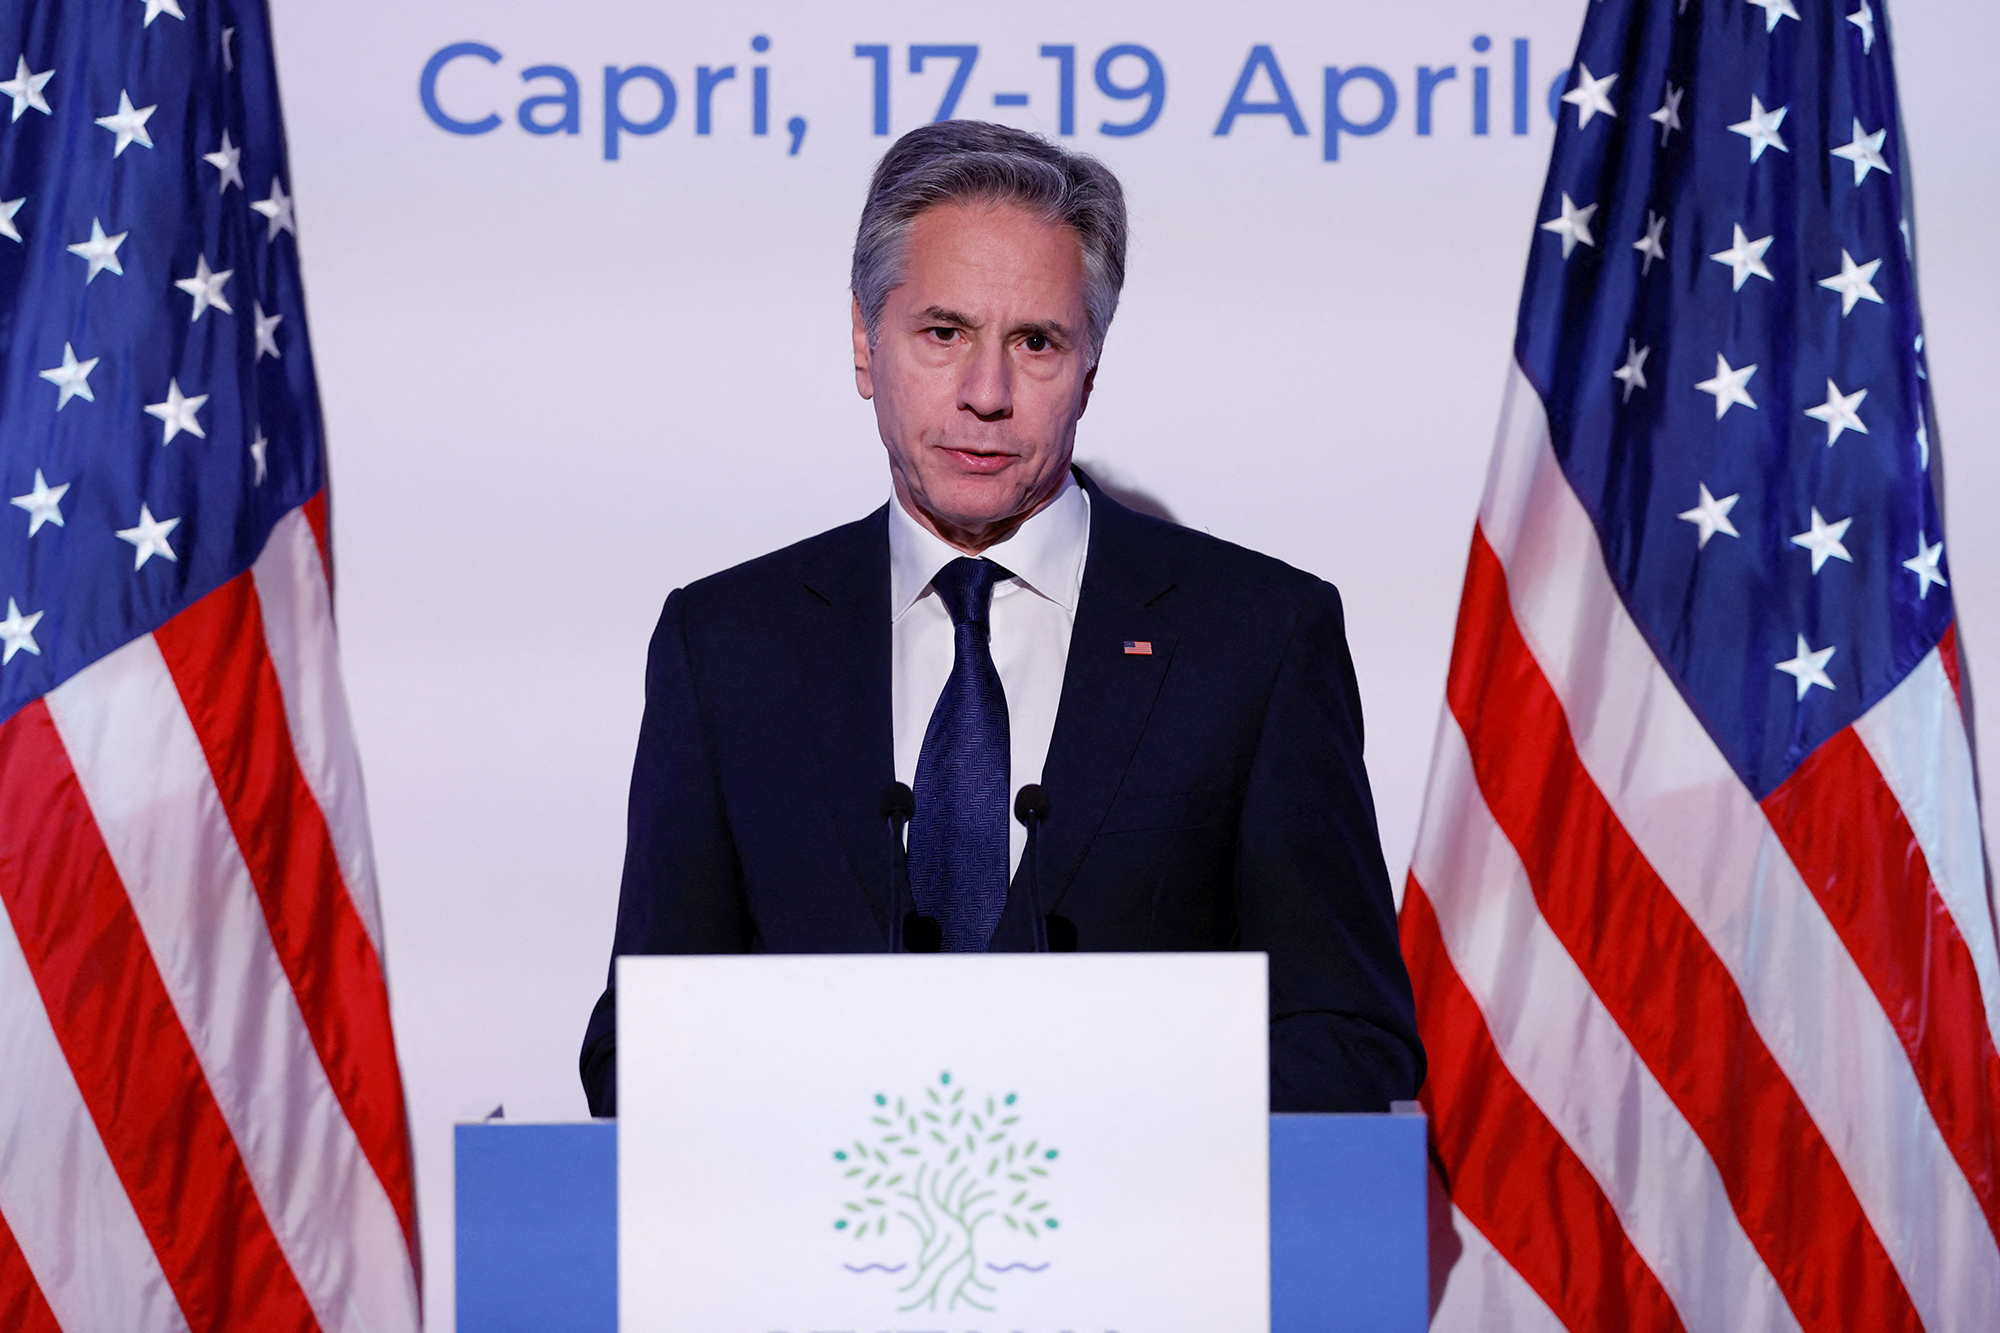 U.S. Secretary of State Antony Blinken holds a press conference at the end of the G7 foreign ministers meeting on Capri island, Italy, on April 19.